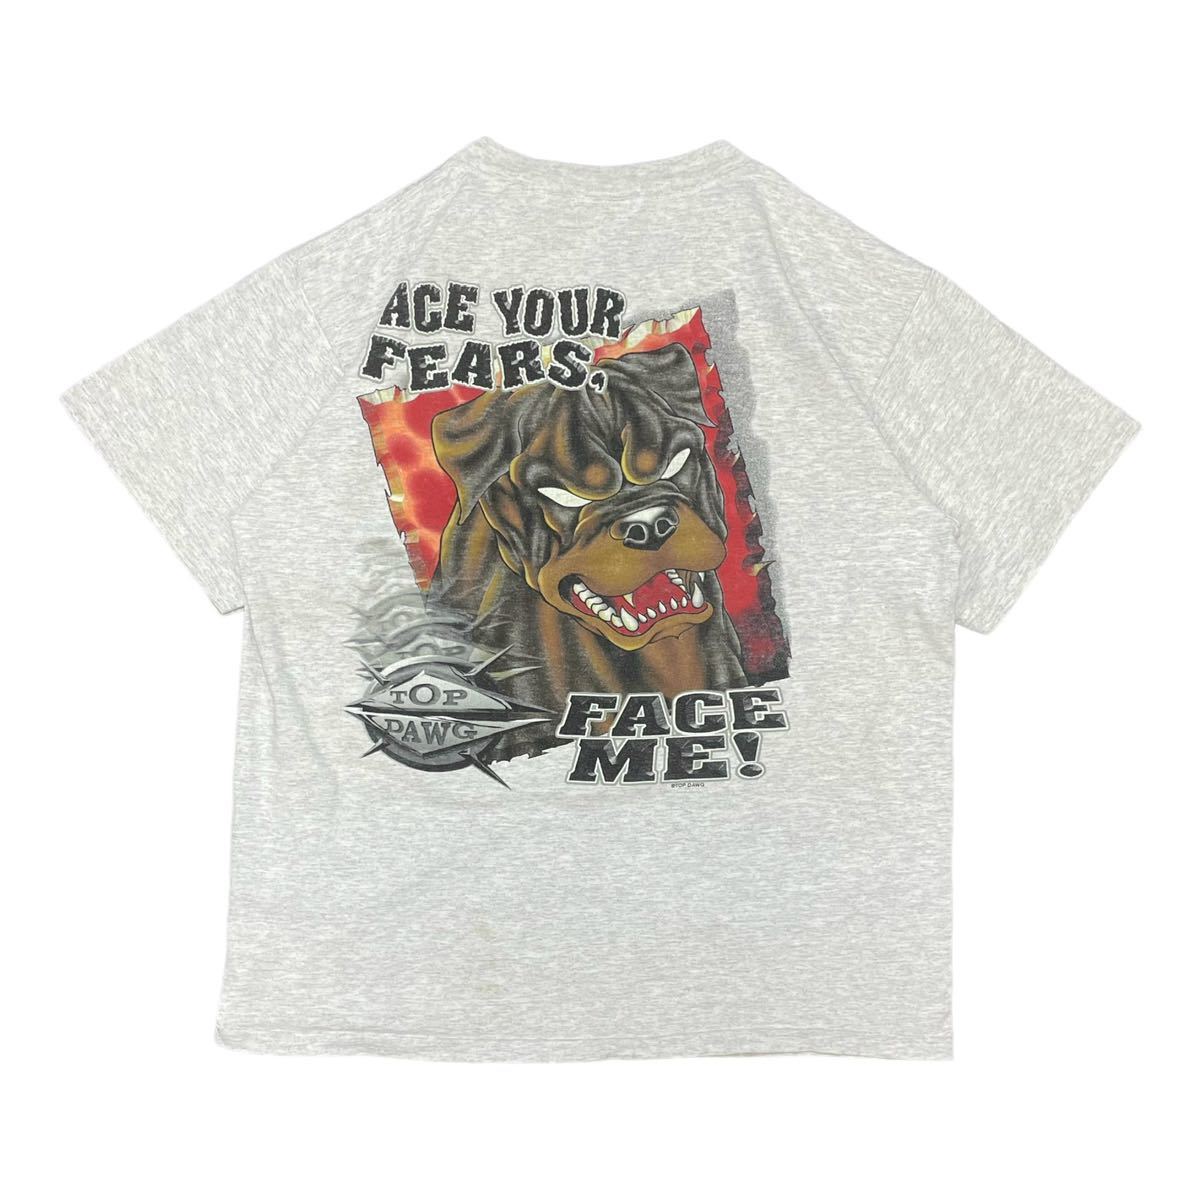 【90s USA製 TOP DAWG バック プリント Tシャツ】ビンテージ ヴィンテージ 古着 80s 70s 60s 50s 40s Y2K ストリート 着用 Tee